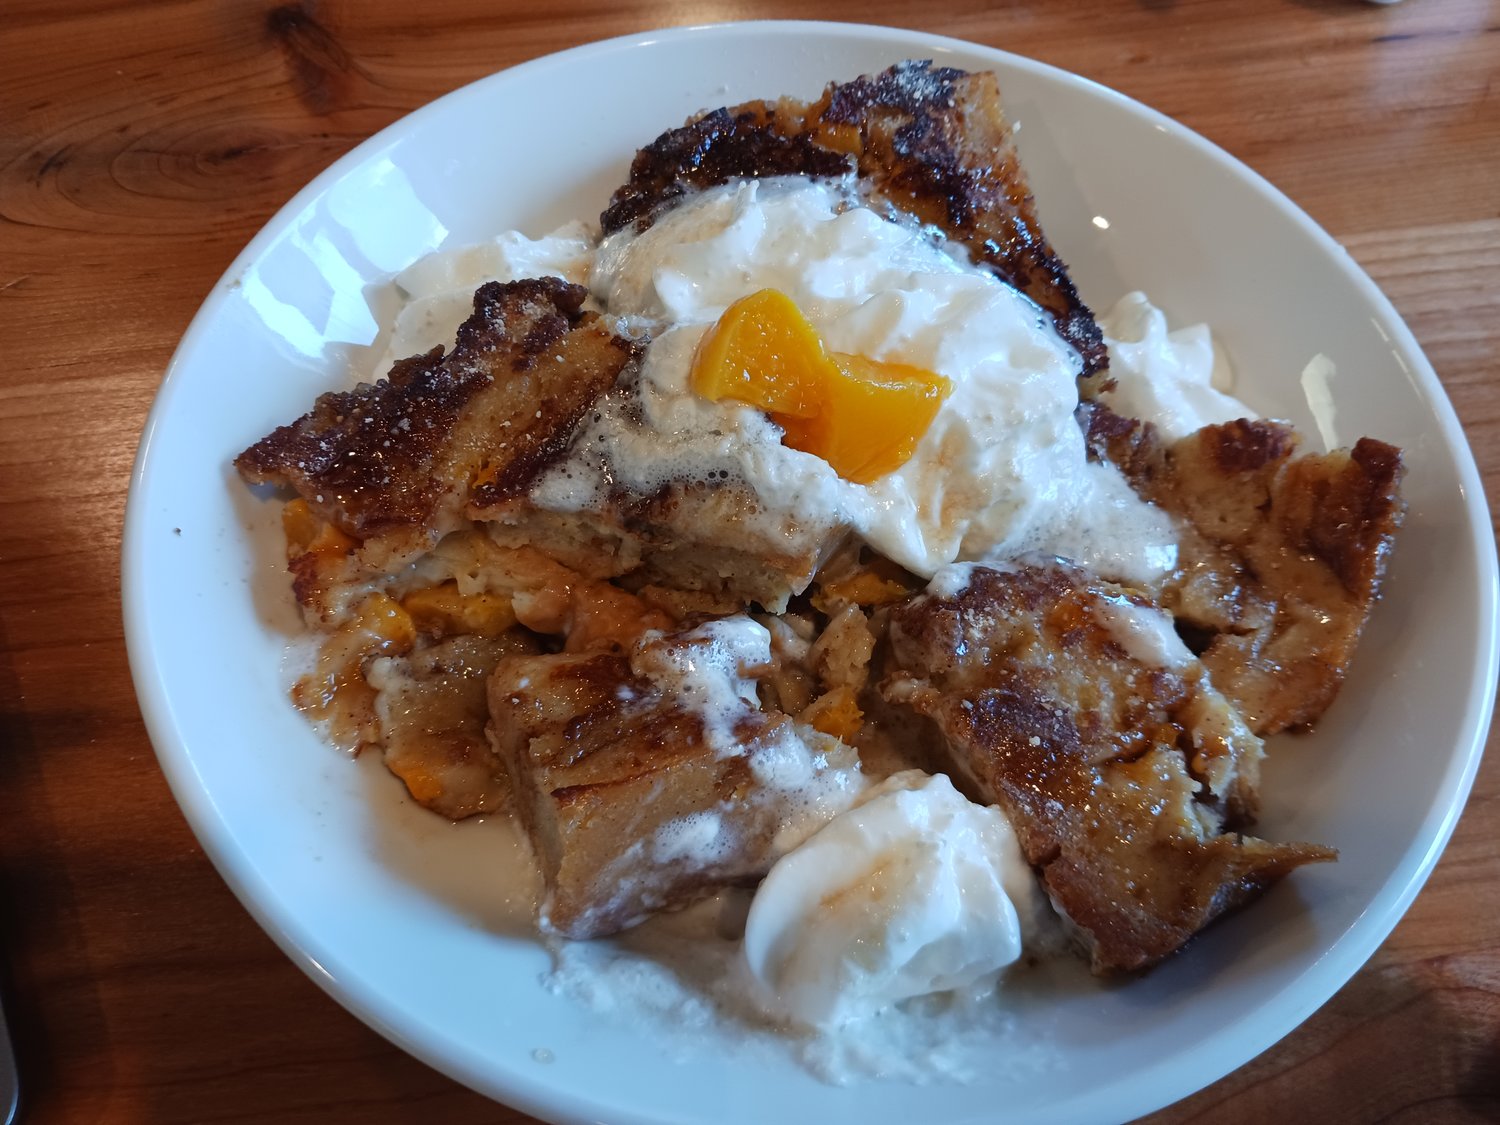 The peach-stuffed, deep dish French toast at Lifted Cup Cafe in Barneveld.